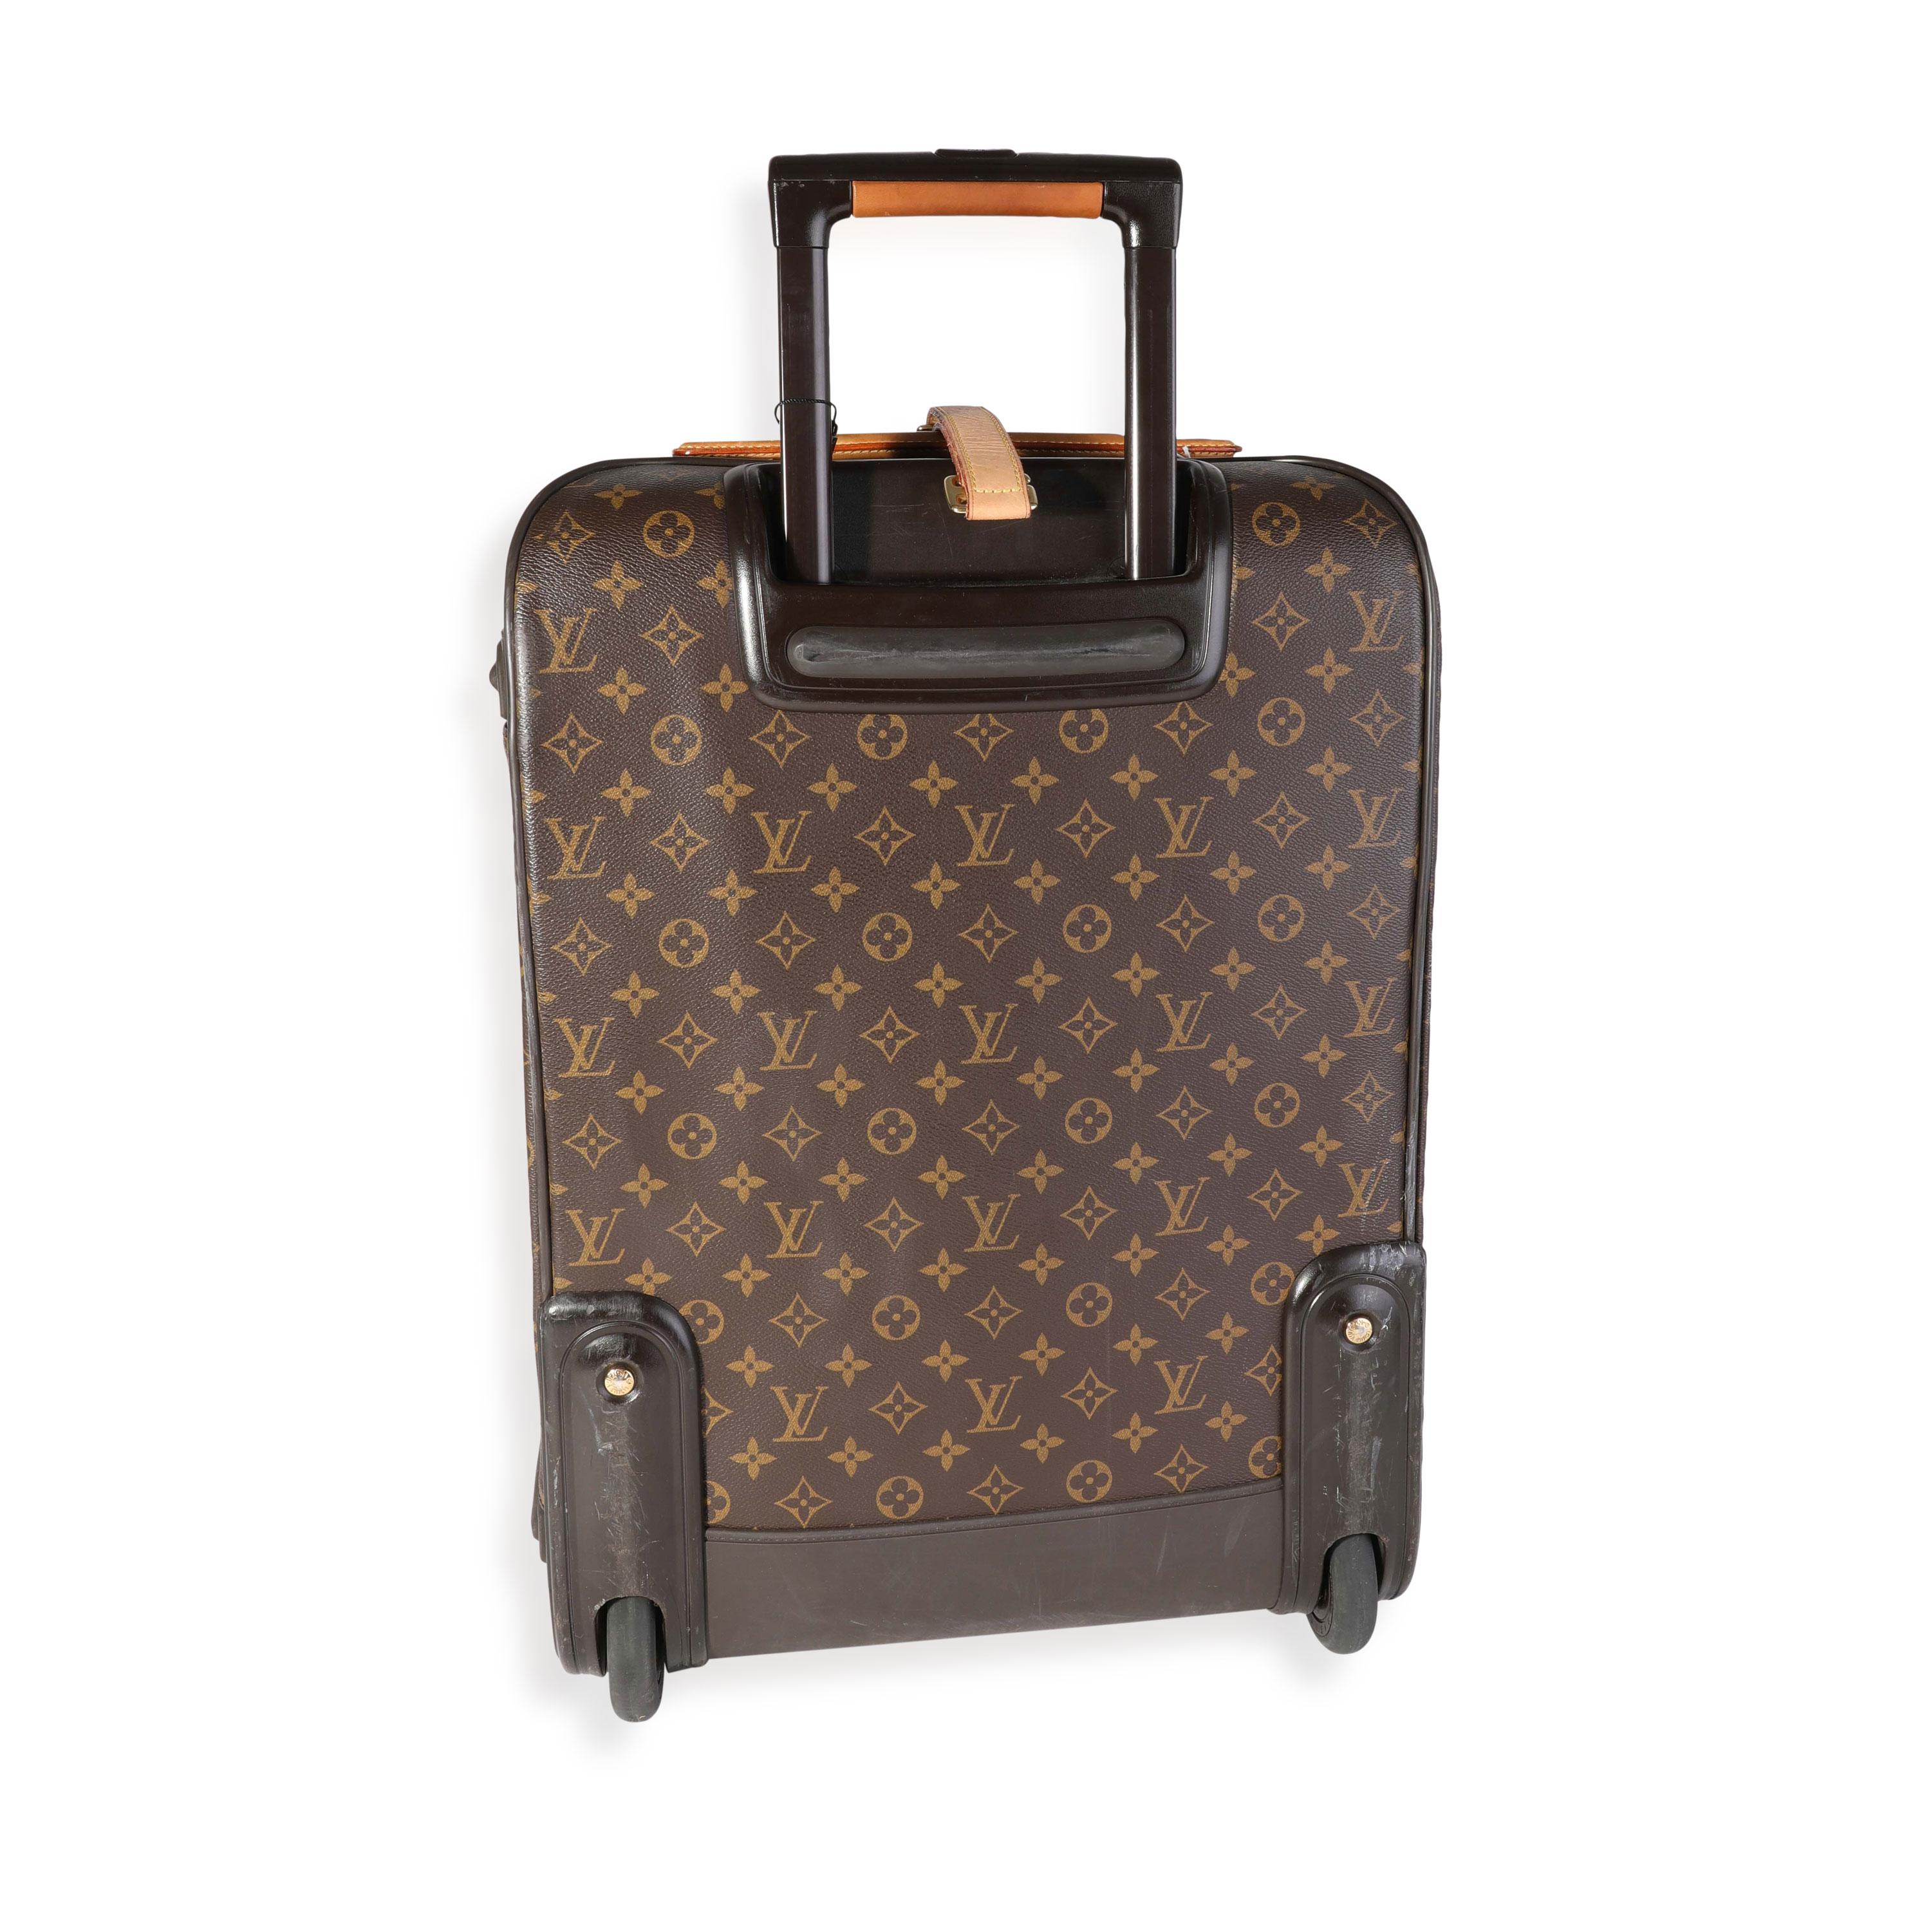 Listing Title: Louis Vuitton Monogram Canvas Pégase 55 Suitcase
SKU: 118575
Condition: Pre-owned (3000)
Handbag Condition: Fair
Condition Comments: Scratches to exterior trim and hardware. Interior is clean.
Brand: Louis Vuitton
Origin Country: